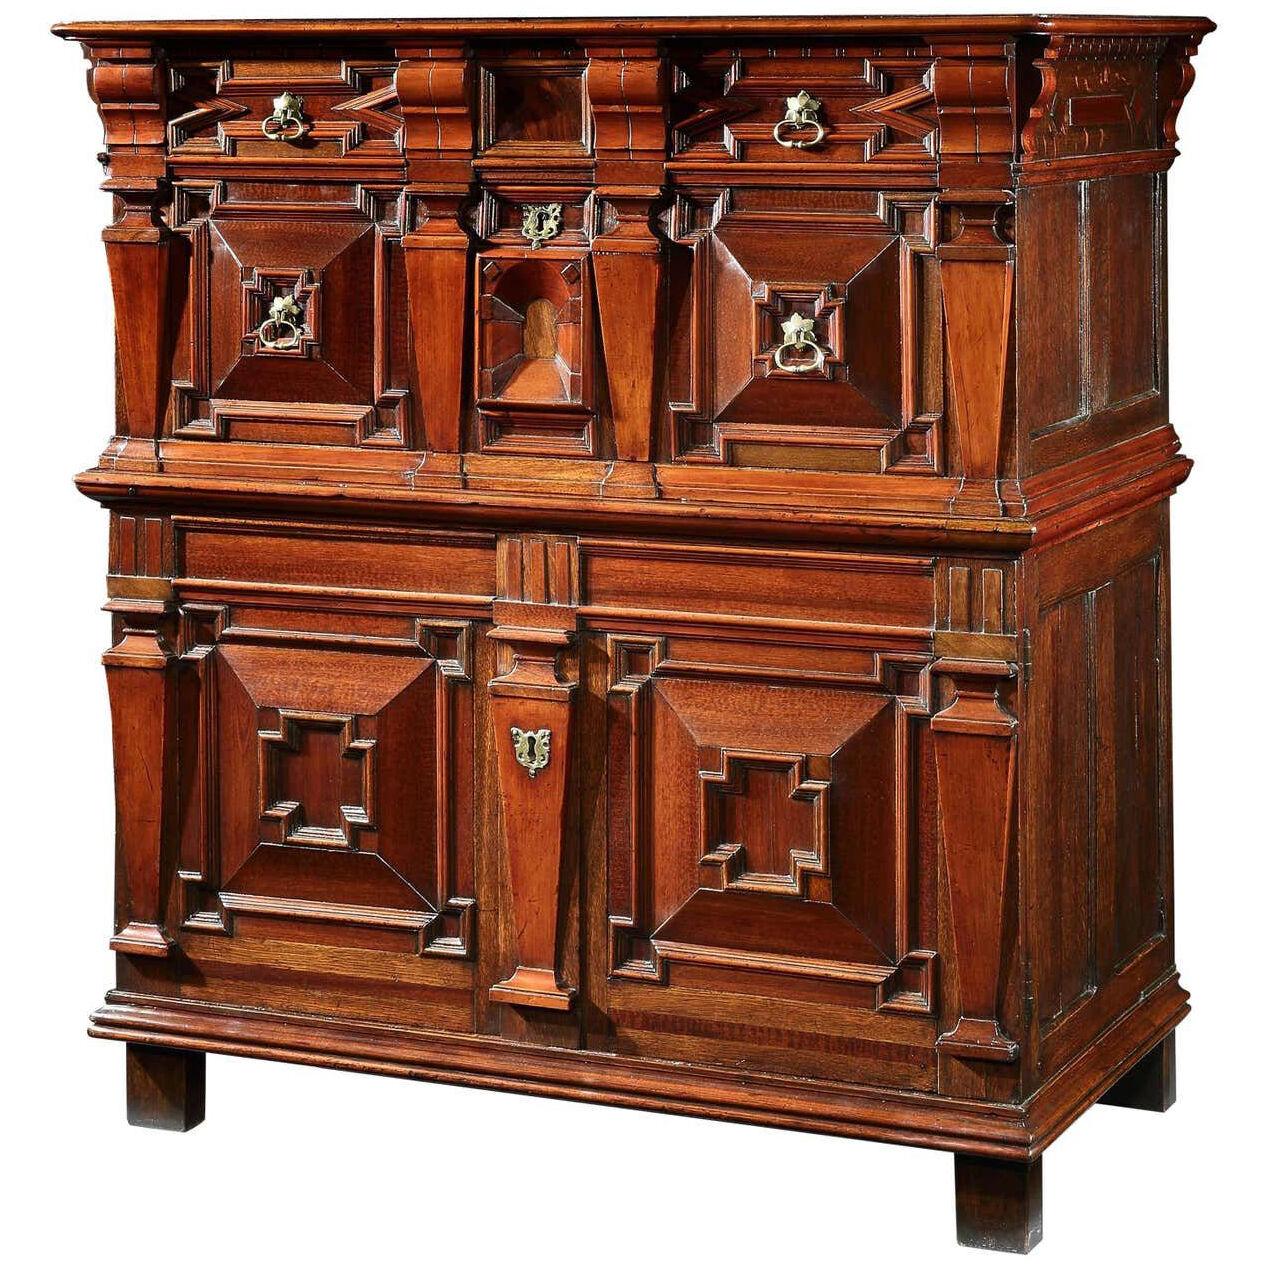 Chest of Drawers Chest Commode Architectural Facade Enclosed Renaissance Cedar